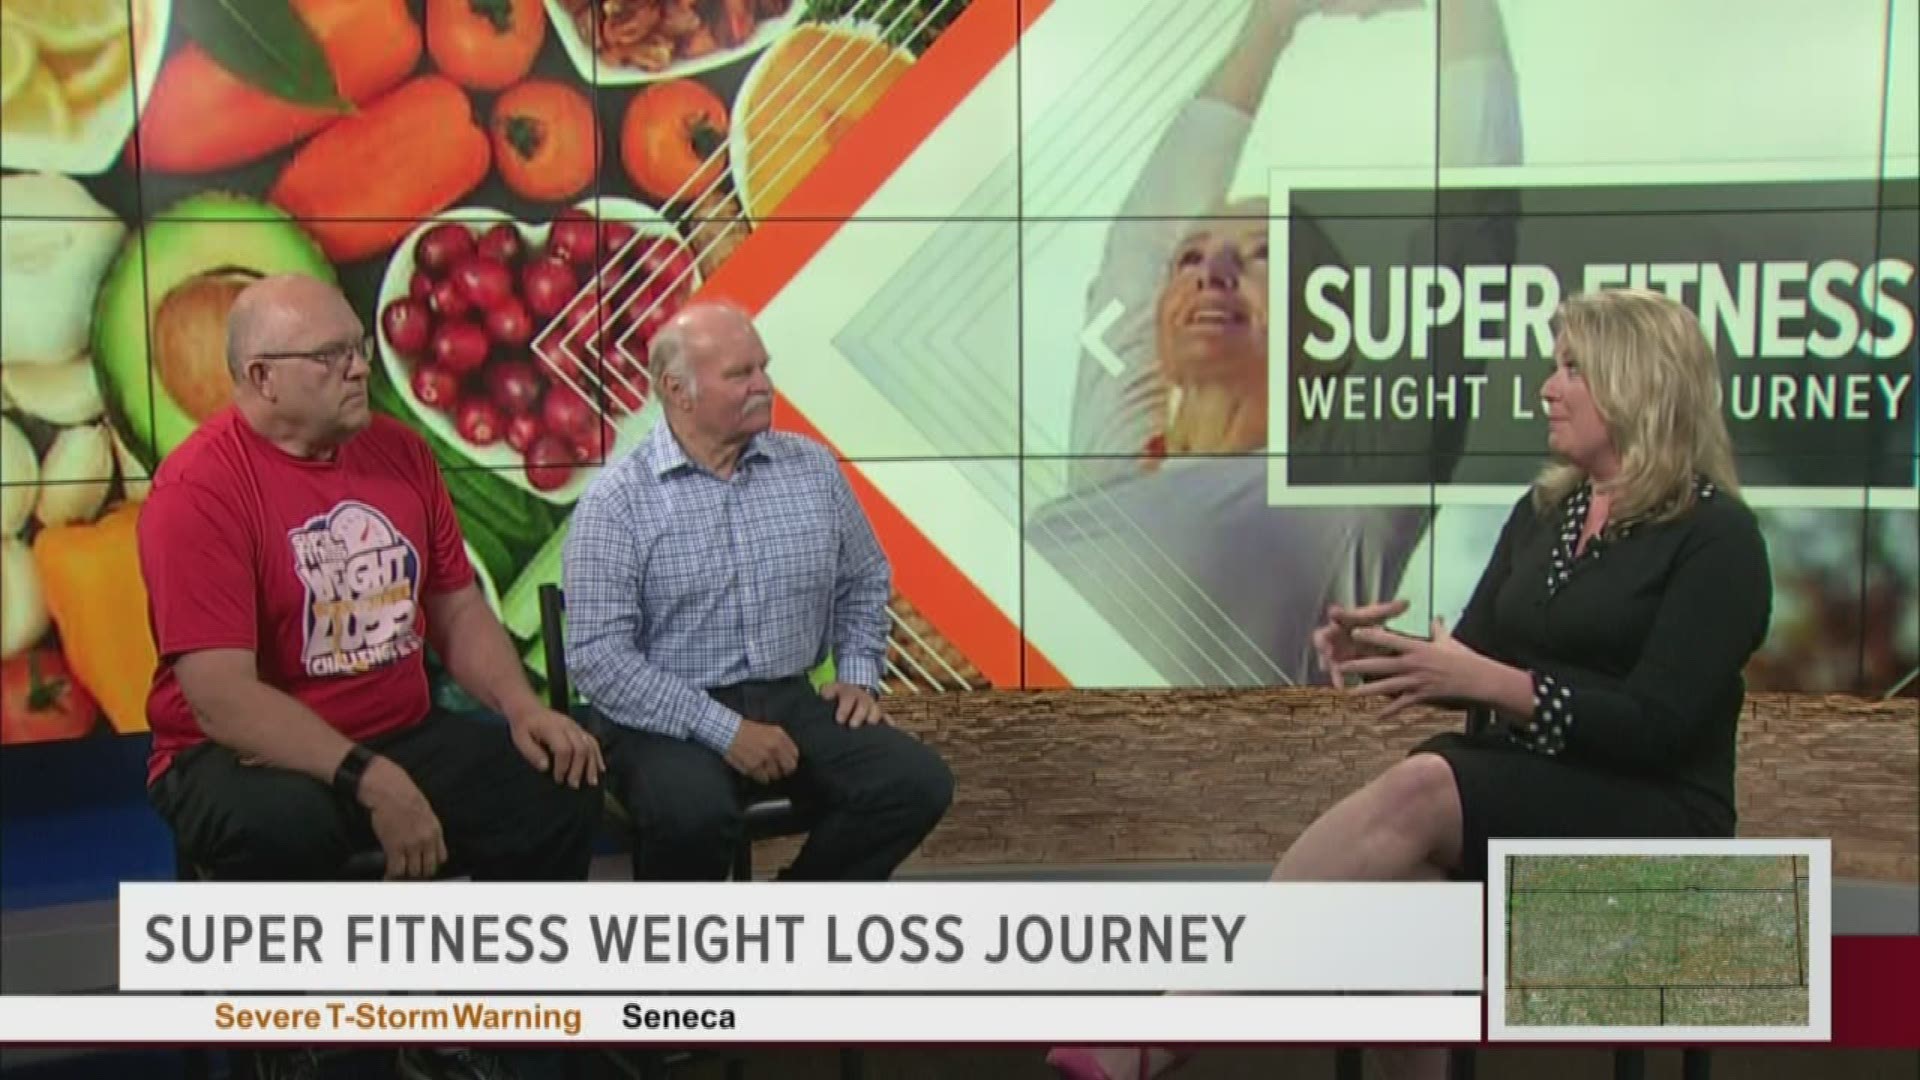 Kelly talks with Super Fitness owner Ron Hemelgarn
and Neil Heiden, the 2018 Super Fitness Weight Loss champion.